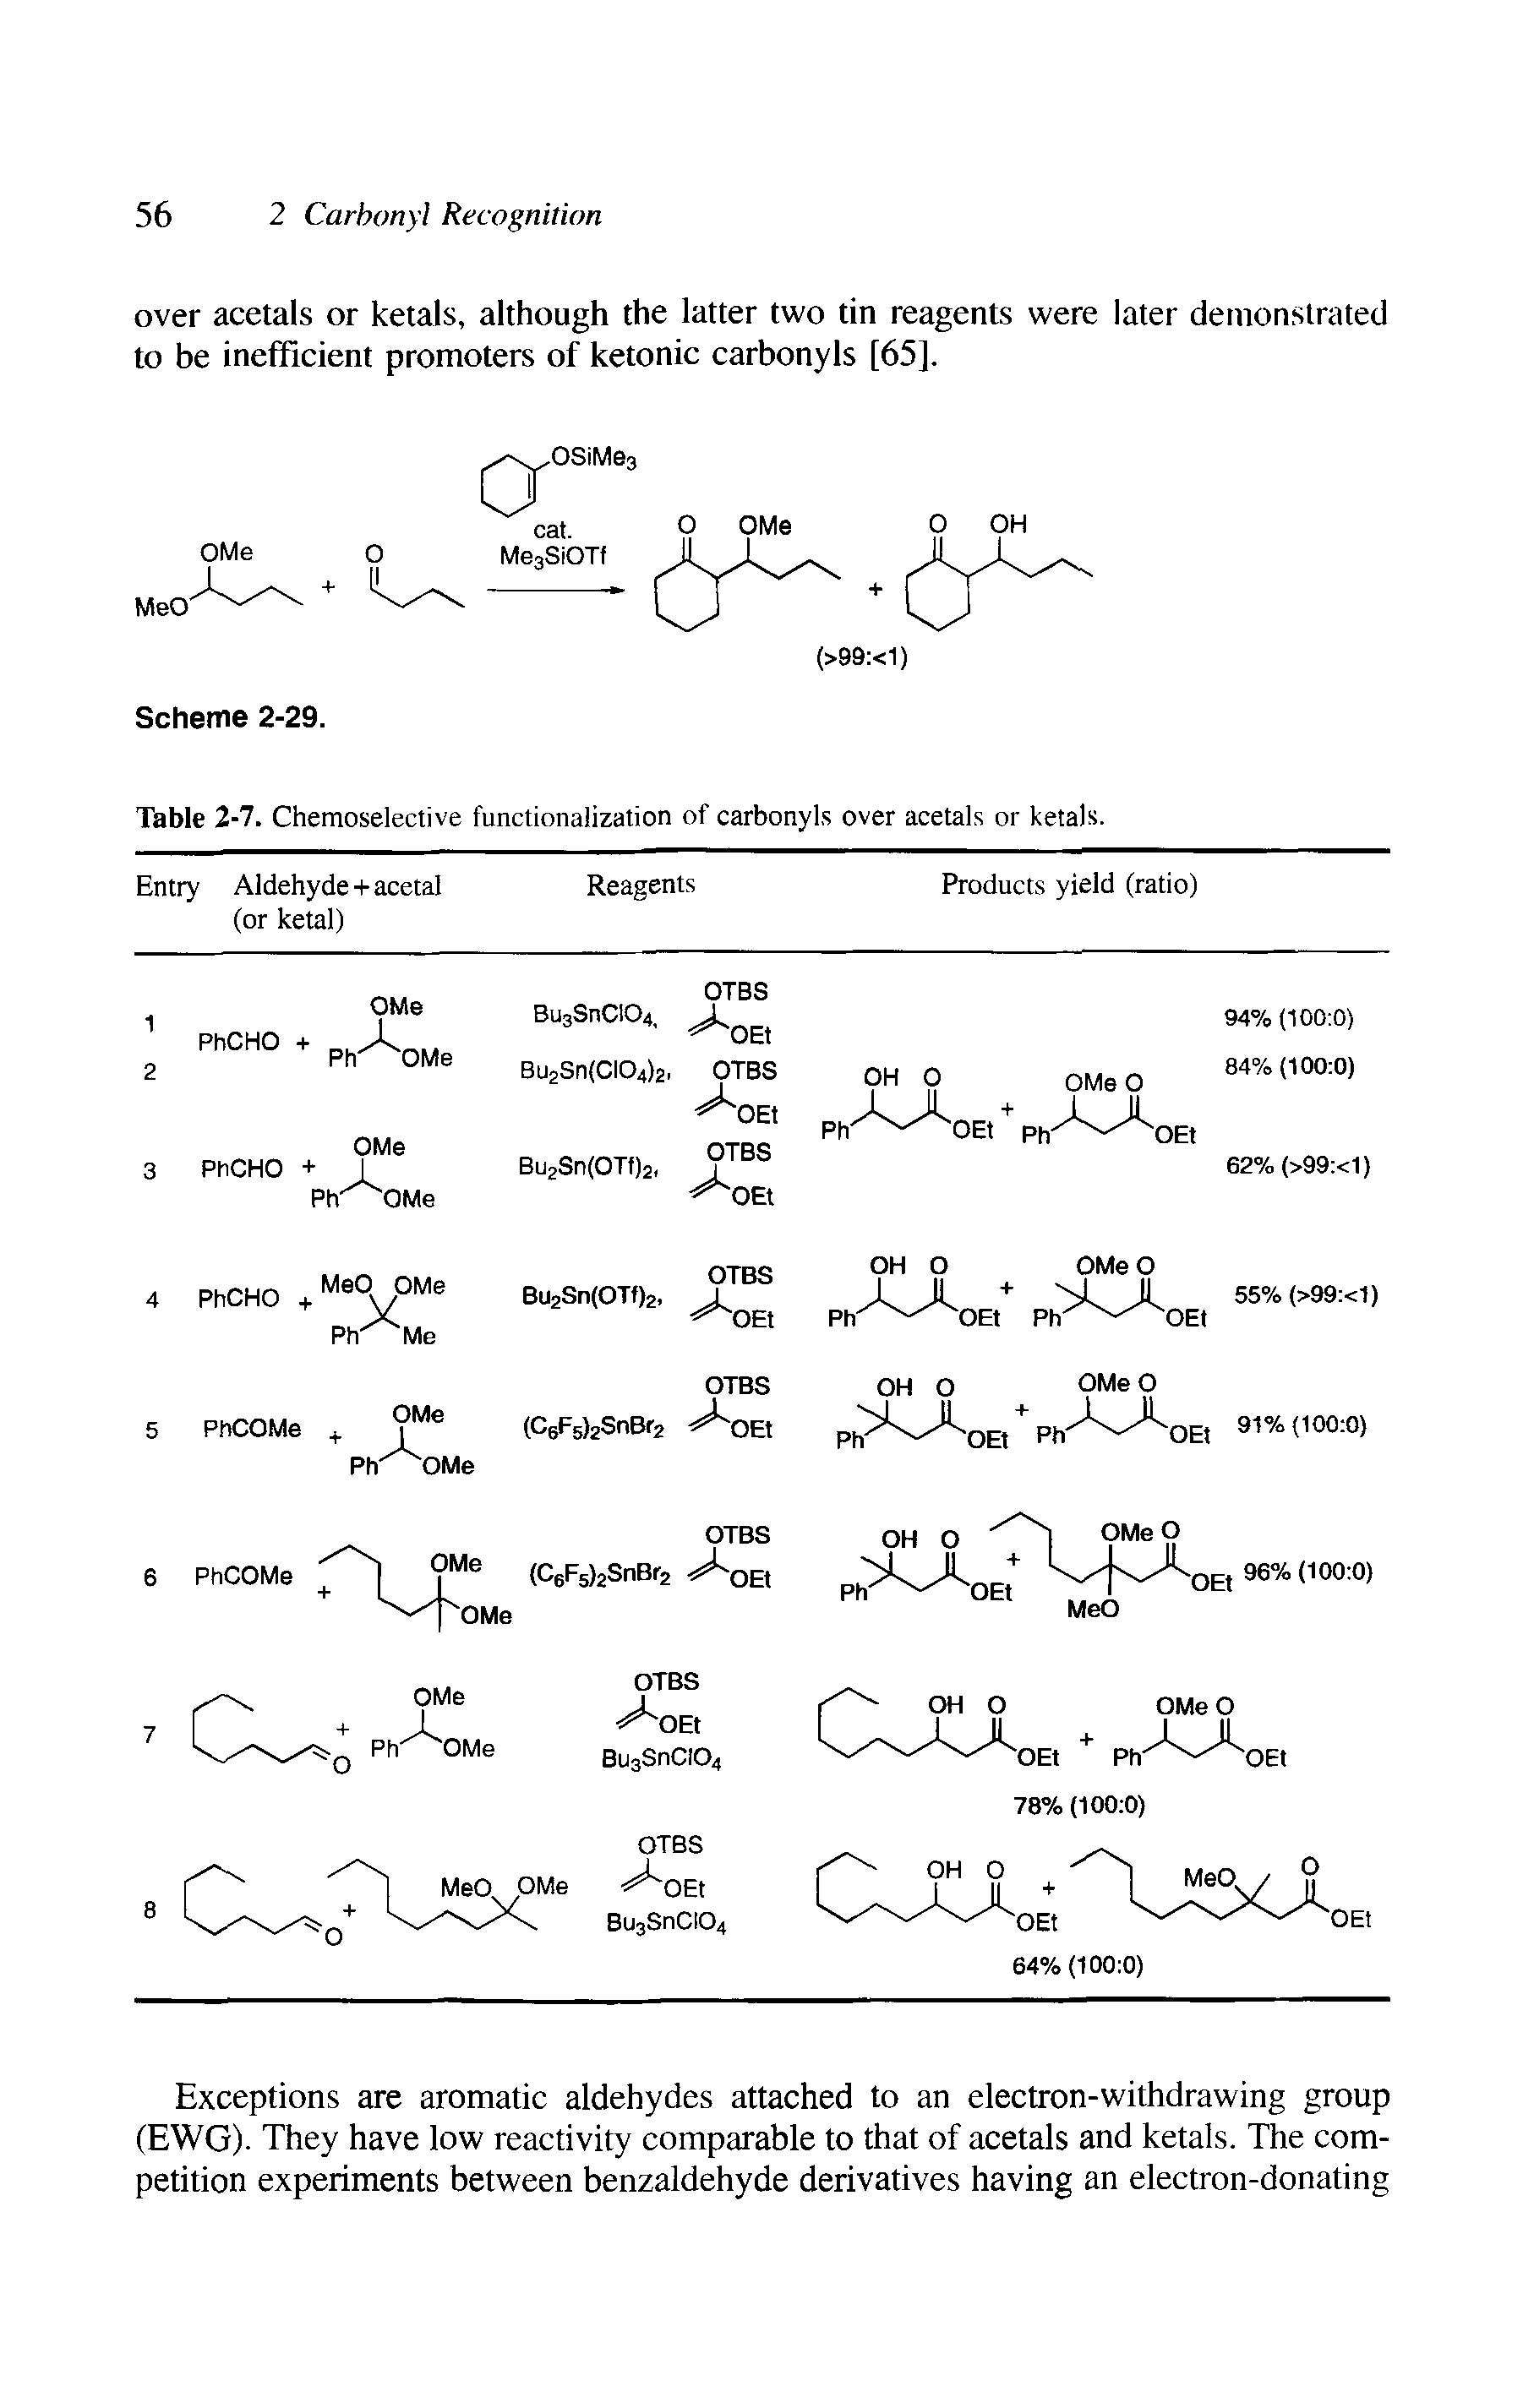 Table 2-7. Chemoselective functionalization of carbonyls over acetals or ketals.